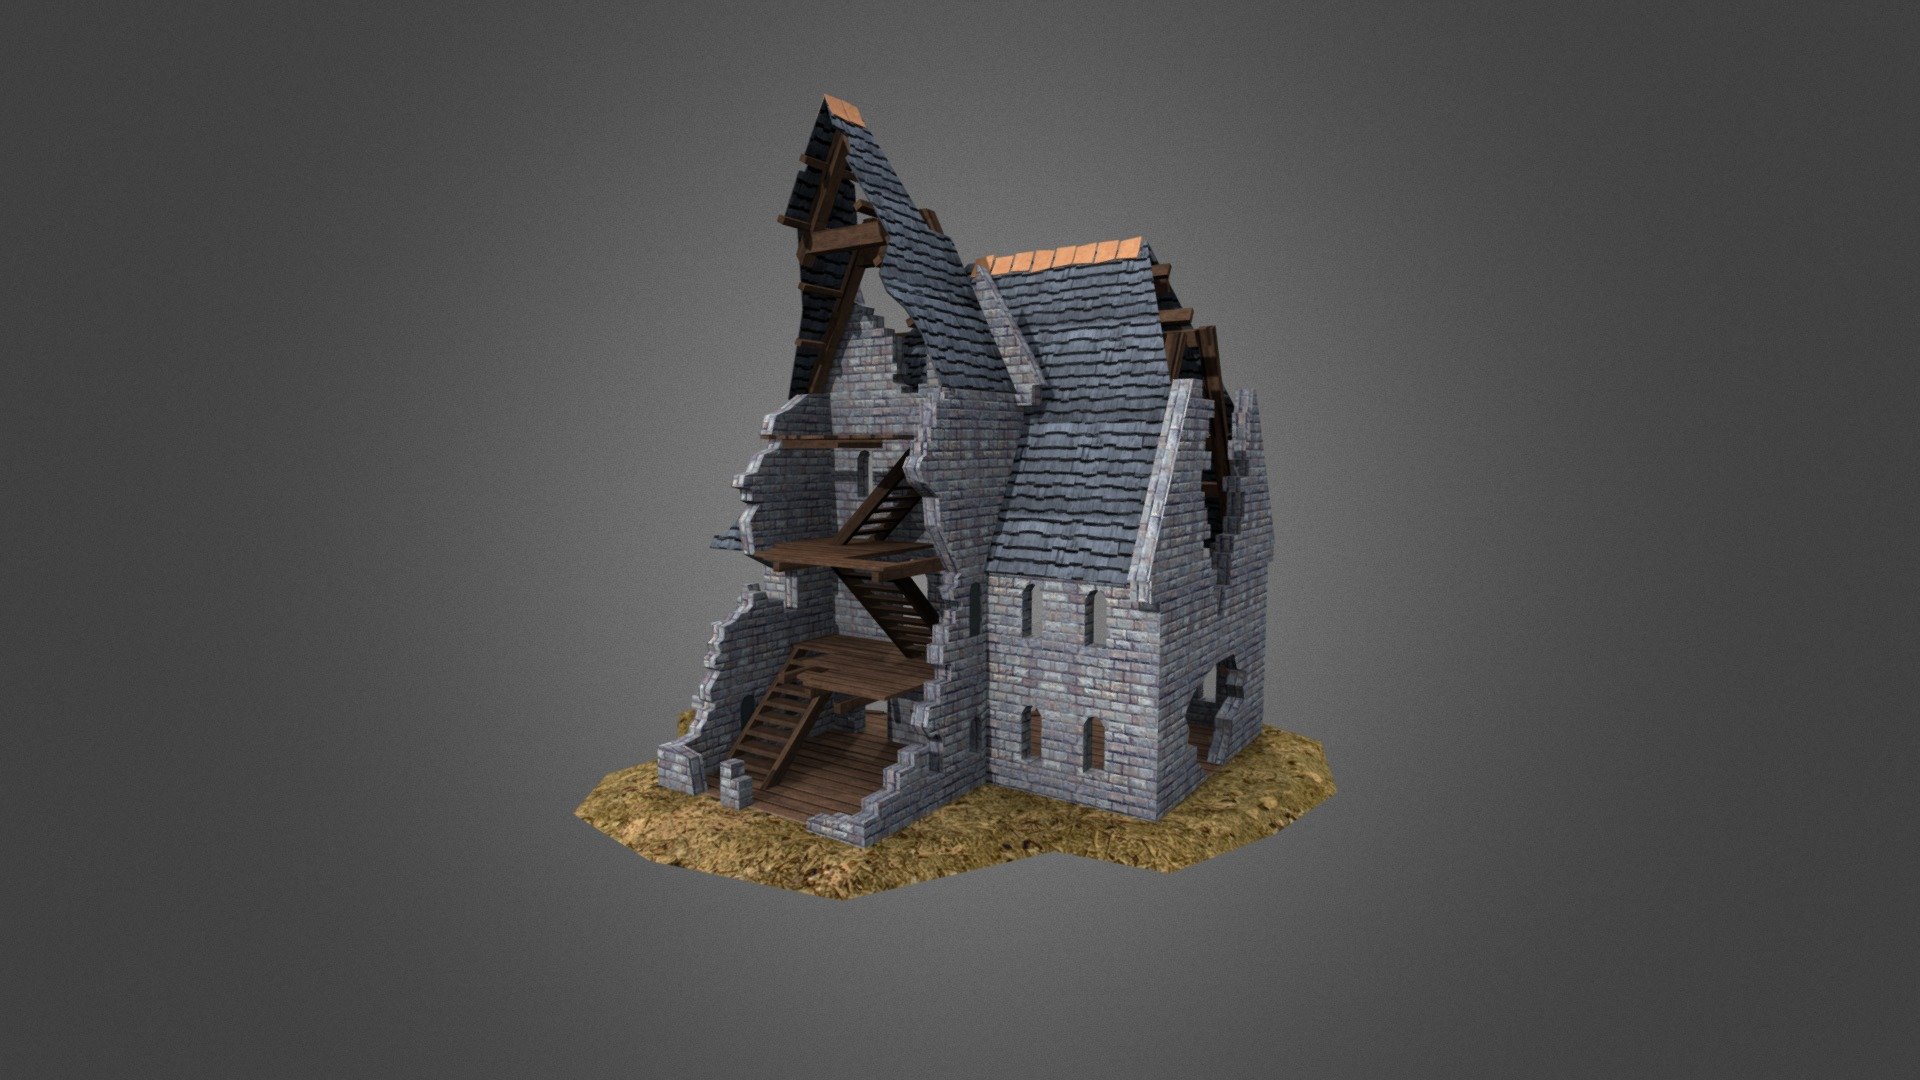 Low poly game-ready 3d model of a Medieval Ruined Church

Download: http://gamedev.cgduck.pro - Medieval Ruined Church - 3D model by CG Duck (@cg_duck) 3d model